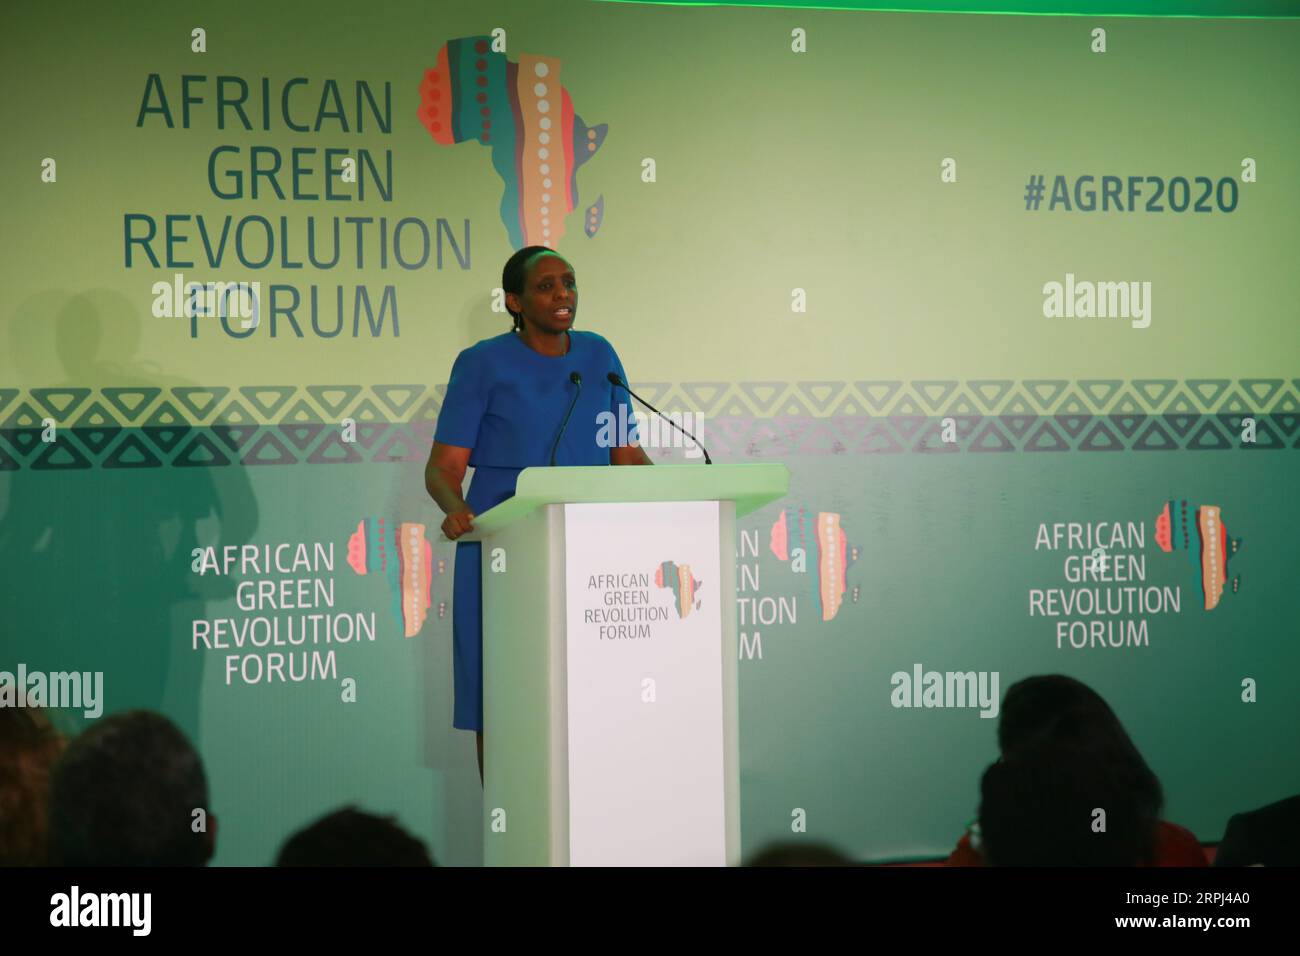 191126 -- KIGALI, Nov. 26, 2019 -- Agnes Kalibata, president of Alliance for a Green Revolution in Africa AGRA, delivers remarks at an event to launch the African Green Revolution Forum AGRF 2020 Summit in Kigali, capital city of Rwanda, Nov. 26, 2019. New apporaches were emphazized on Monday in Rwanda s Kigali to address rising cases of hunger and food insecurity challenges in Africa.  RWANDA-KIGALI-AGRF SUMMIT-FOOD INSECURITY CHALLENGES-LAUNCH EVENT LyuxTianran PUBLICATIONxNOTxINxCHN Stock Photo